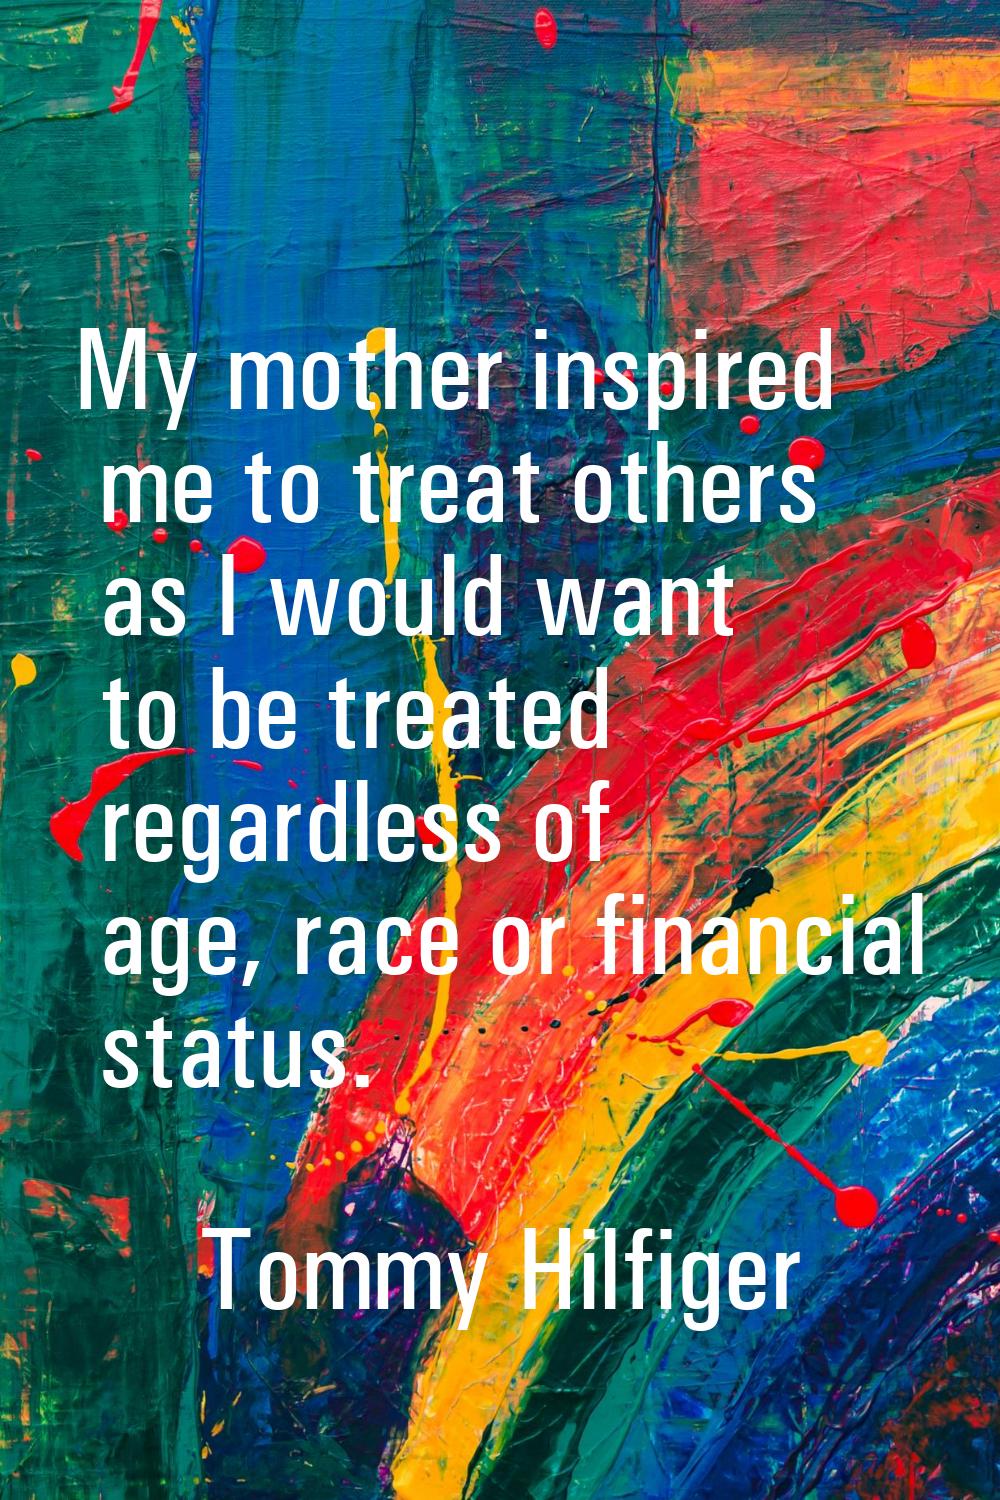 My mother inspired me to treat others as I would want to be treated regardless of age, race or fina